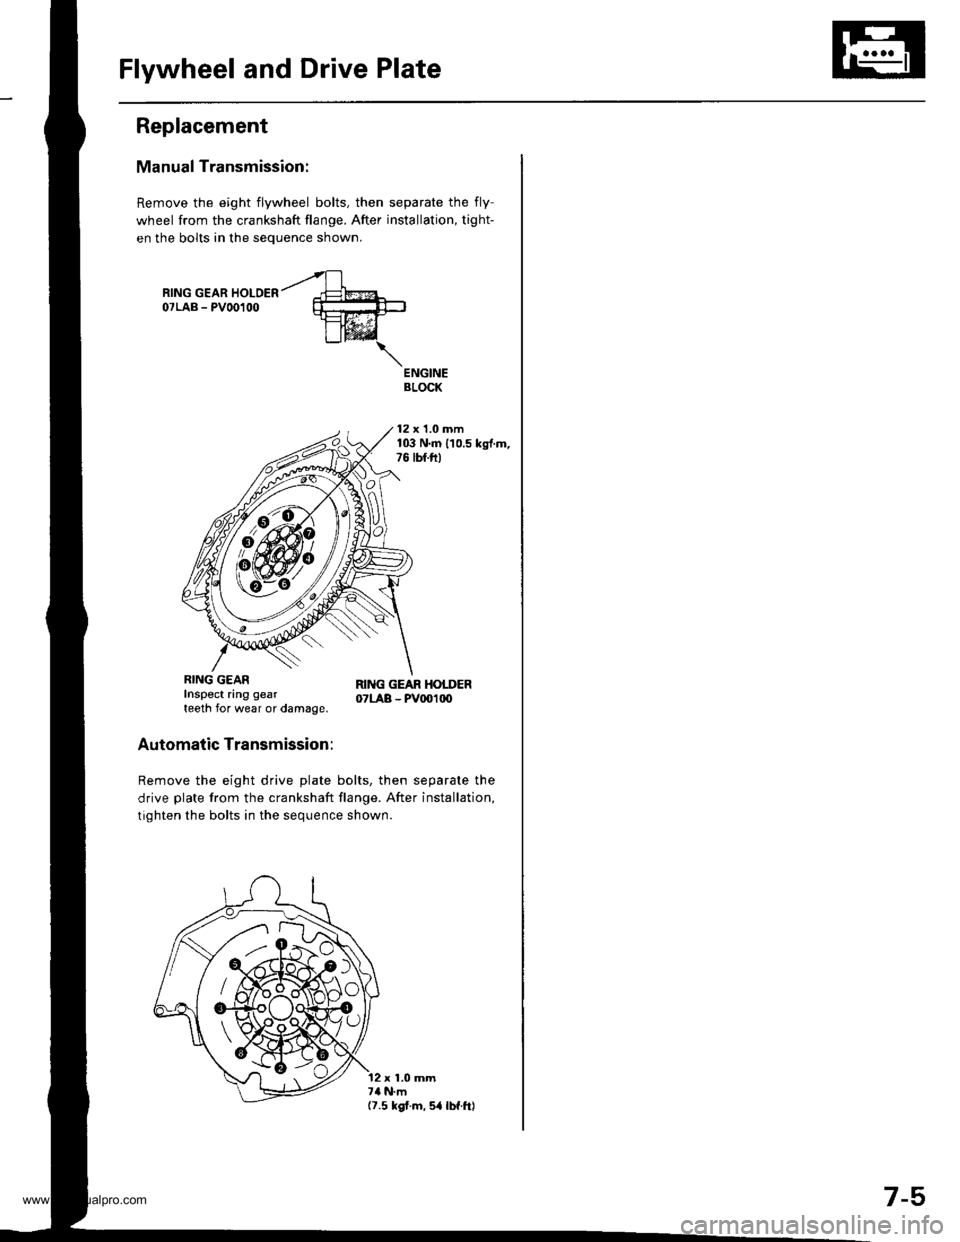 HONDA CR-V 1997 RD1-RD3 / 1.G Workshop Manual 
Flywheel and Drive Plate
Replacement
Manual Transmission:
Remove the eight flywheel bolts, then separate the fly-
wheel from the crankshaft flange. After installation, tight-
en the bolts in the sequ